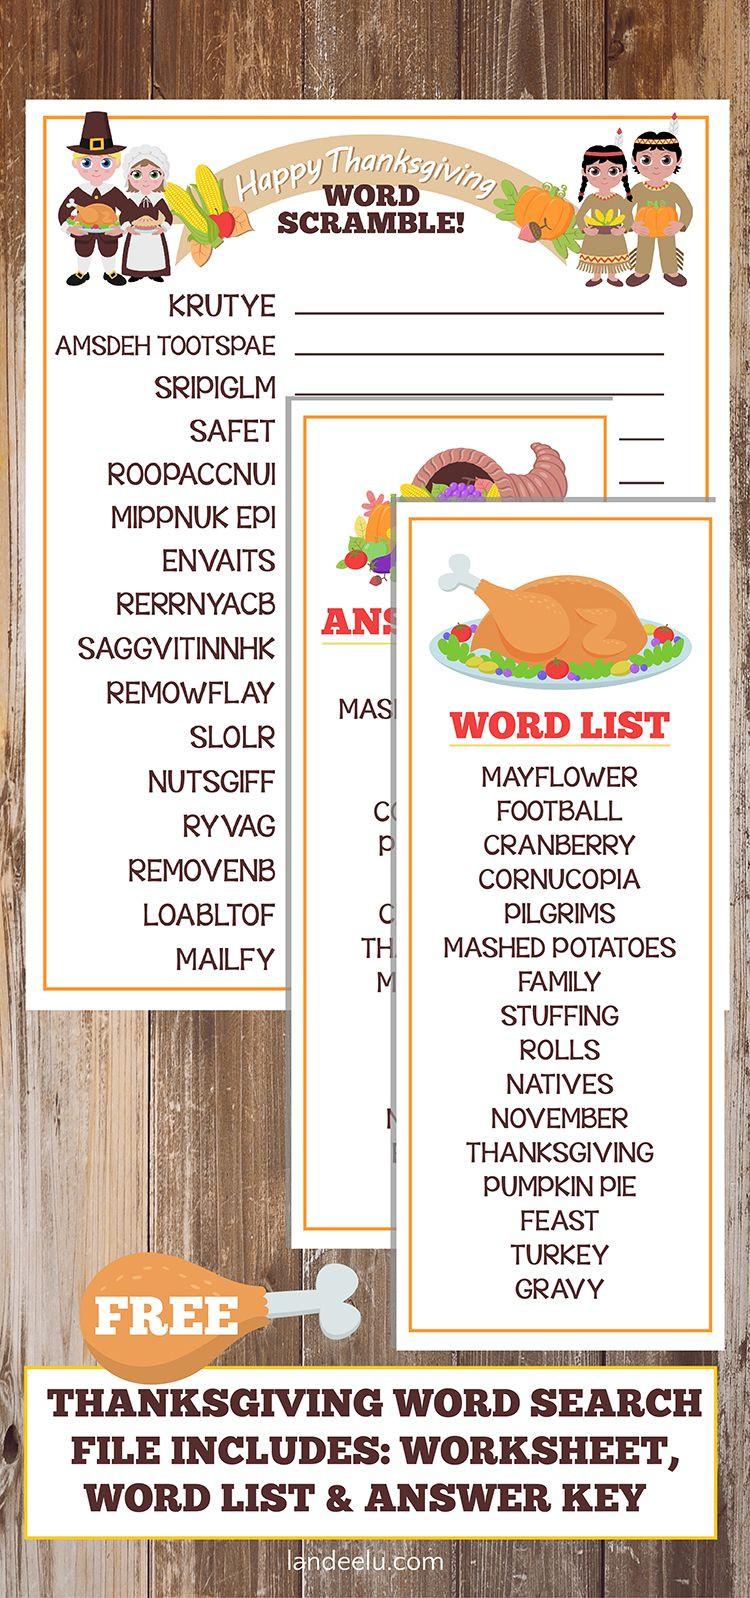 Thanksgiving Dinner Word Whizzle Search
 Thanksgiving Worksheet Word Scramble